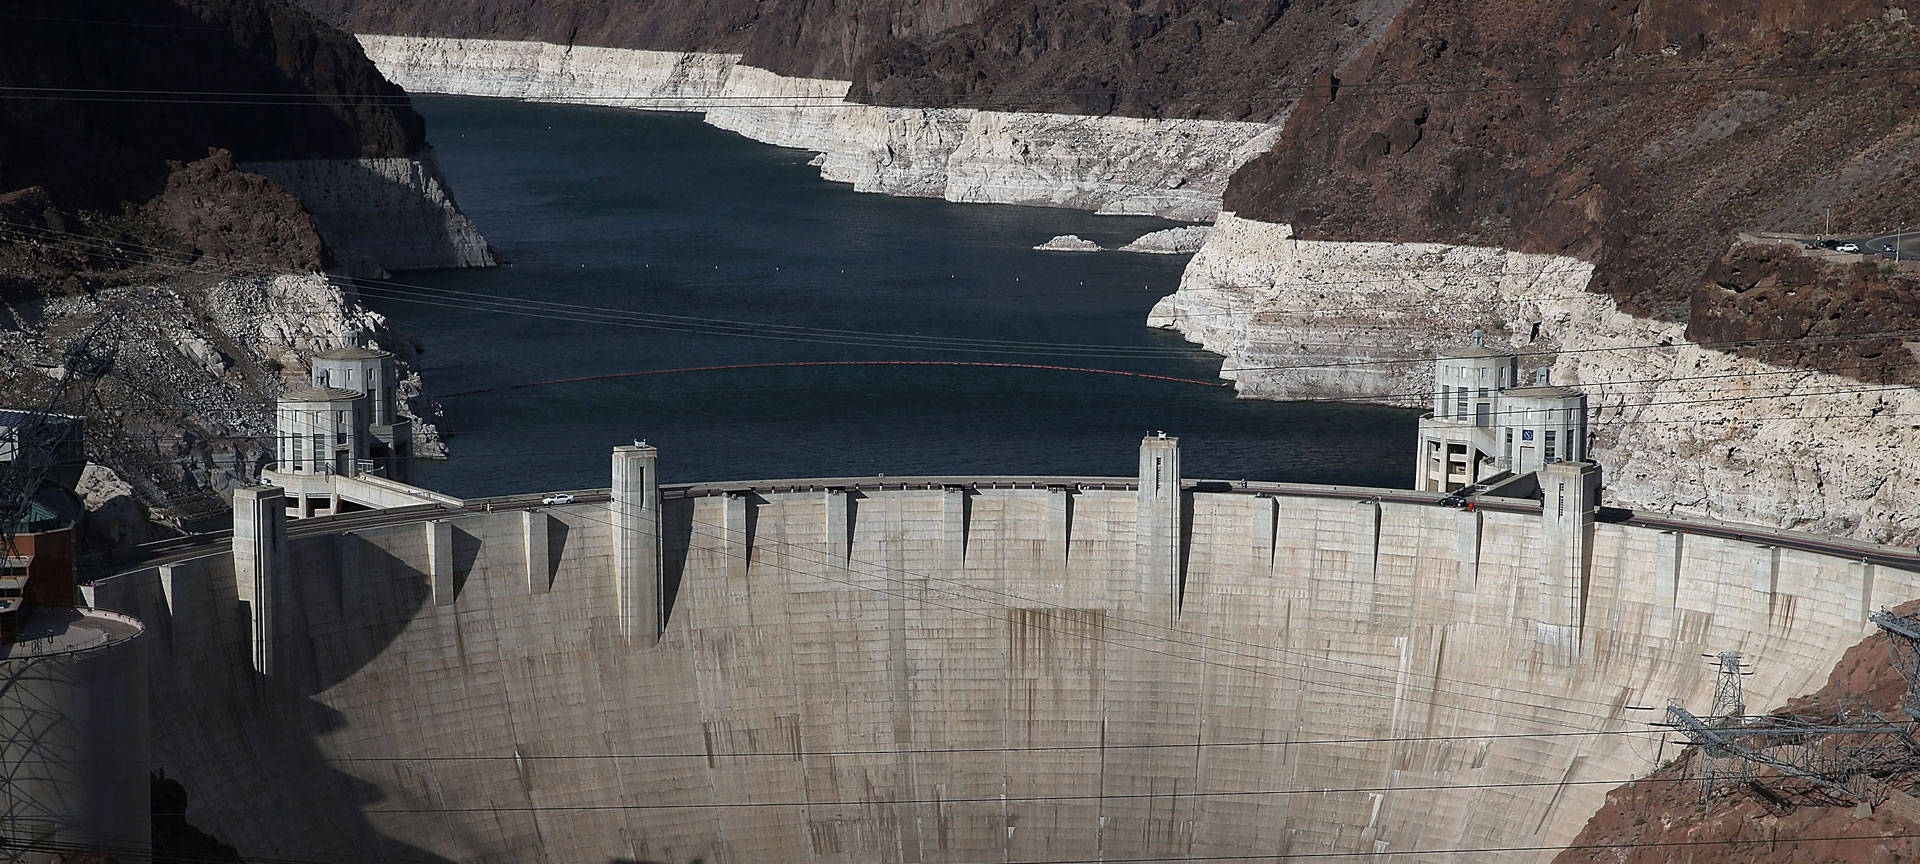 Lake Mead, the largest reservoir on the Colorado River, has hit record lows. Justin Sullivan/Getty Images